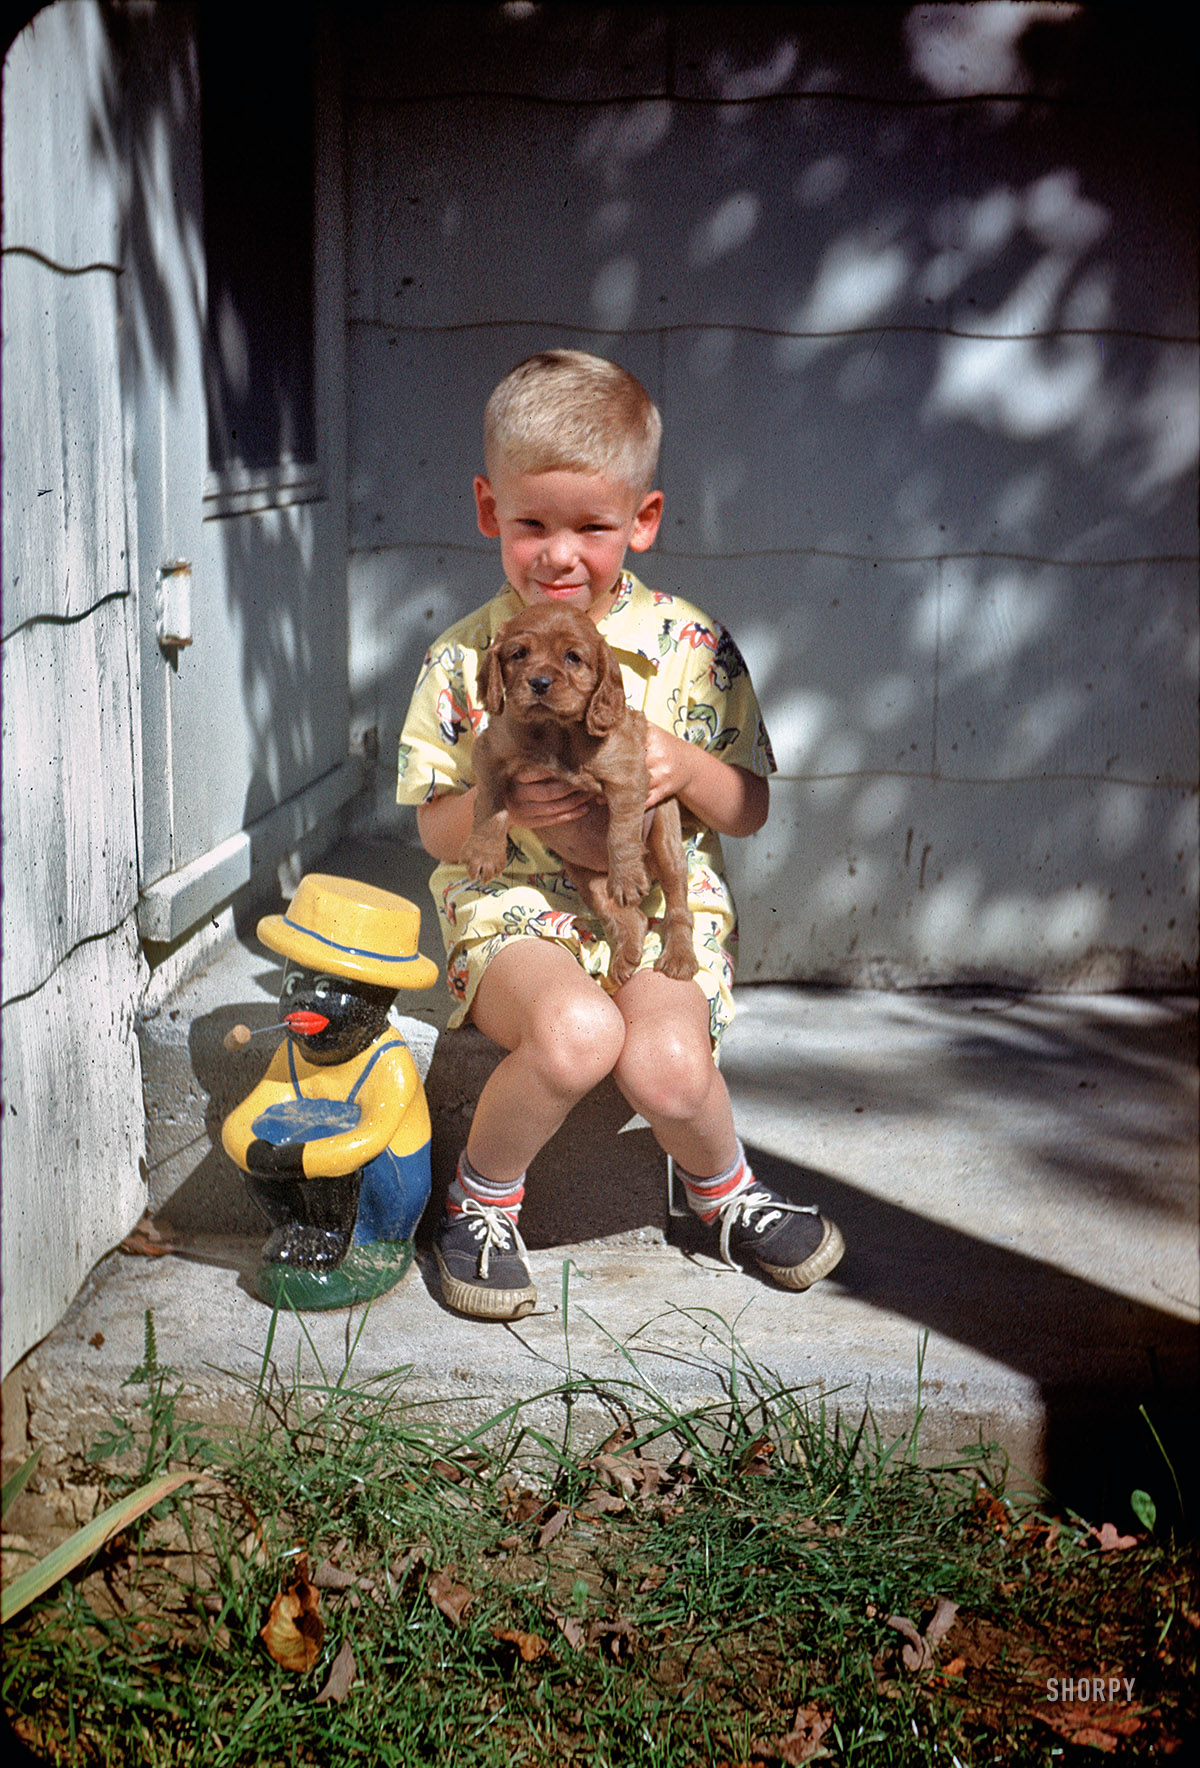 "1951." The boy and his dog, along with a radioactive lawn ornament. From a box of 35mm Kodachrome slides found last month on eBay. View full size.